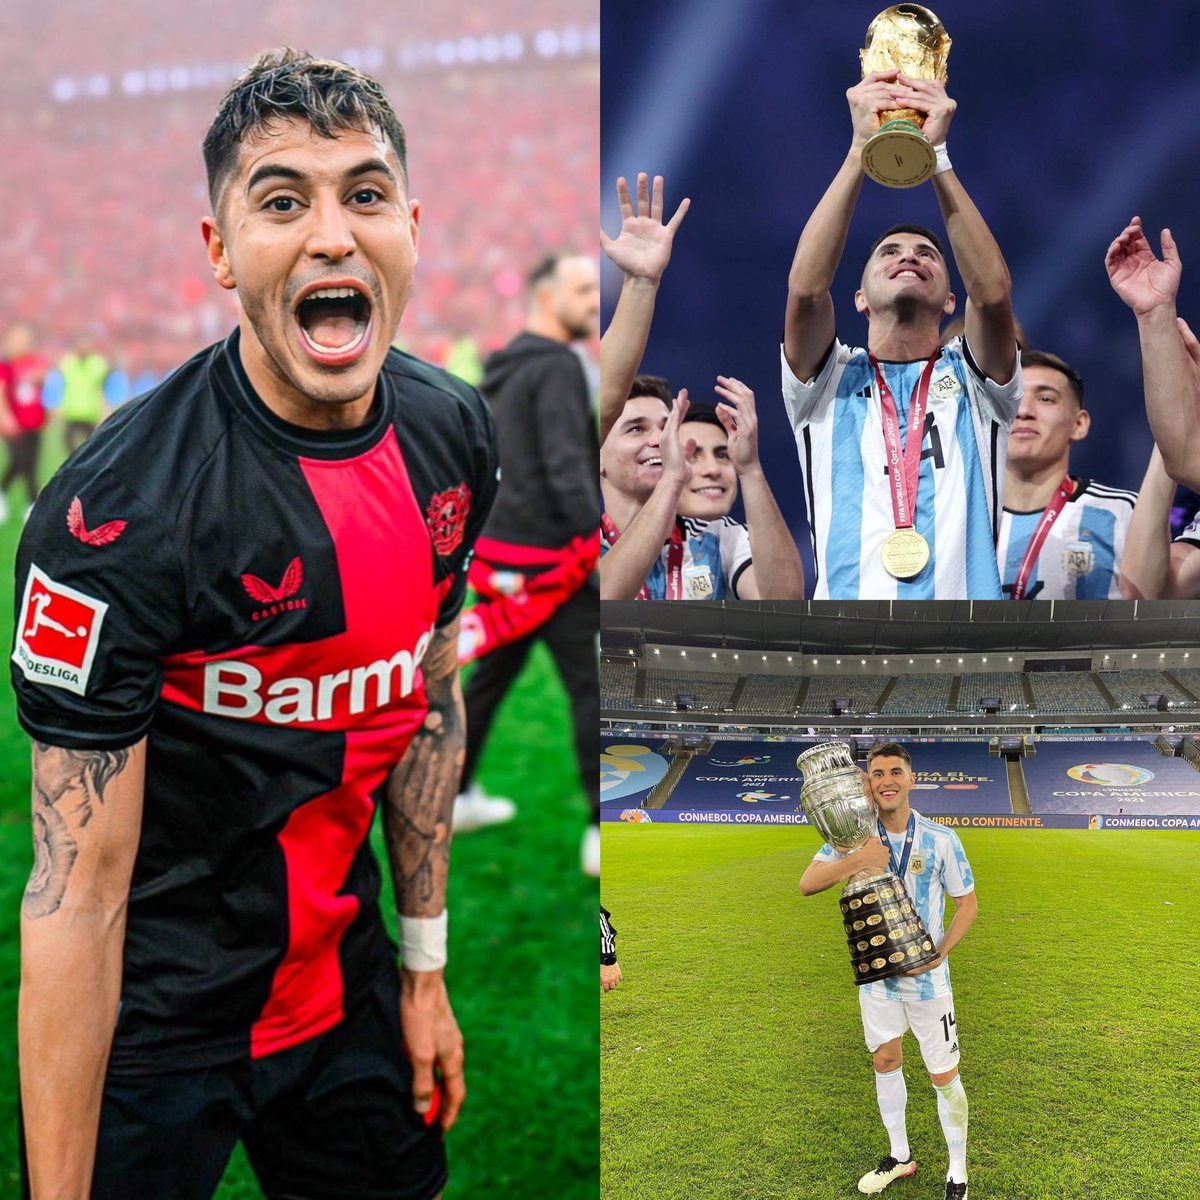 Exequiel PALACIOS is the FIRST player in HISTORY to be:

• The current World Champion 🏆 

• The current Continental Champion (Copa America/Euro's) 🏆 

• The current undefeated Champion of a top 5 European league 🏆